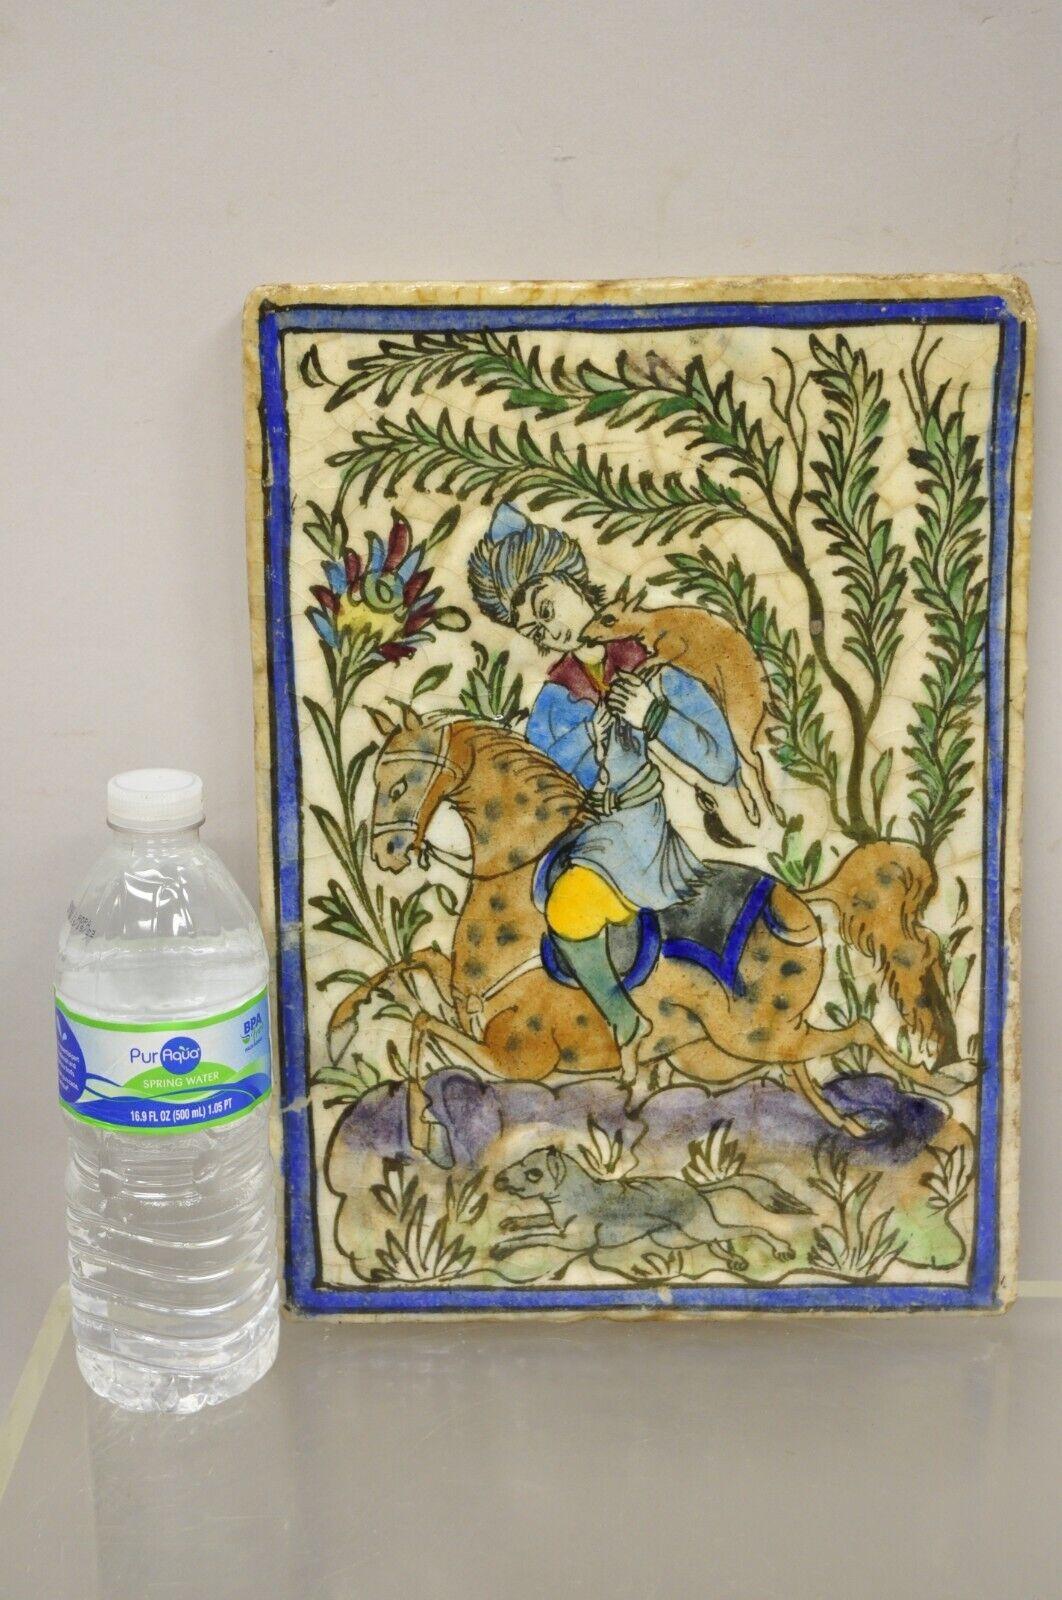 Antique Persian Iznik Qajar Style Ceramic Pottery Tile Horse and Rider Hunt Scene C1. Original crackle glazed finish, heavy ceramic pottery construction, very impressive detail, wonderful style and form. Great to mount as wall art or accent tiles